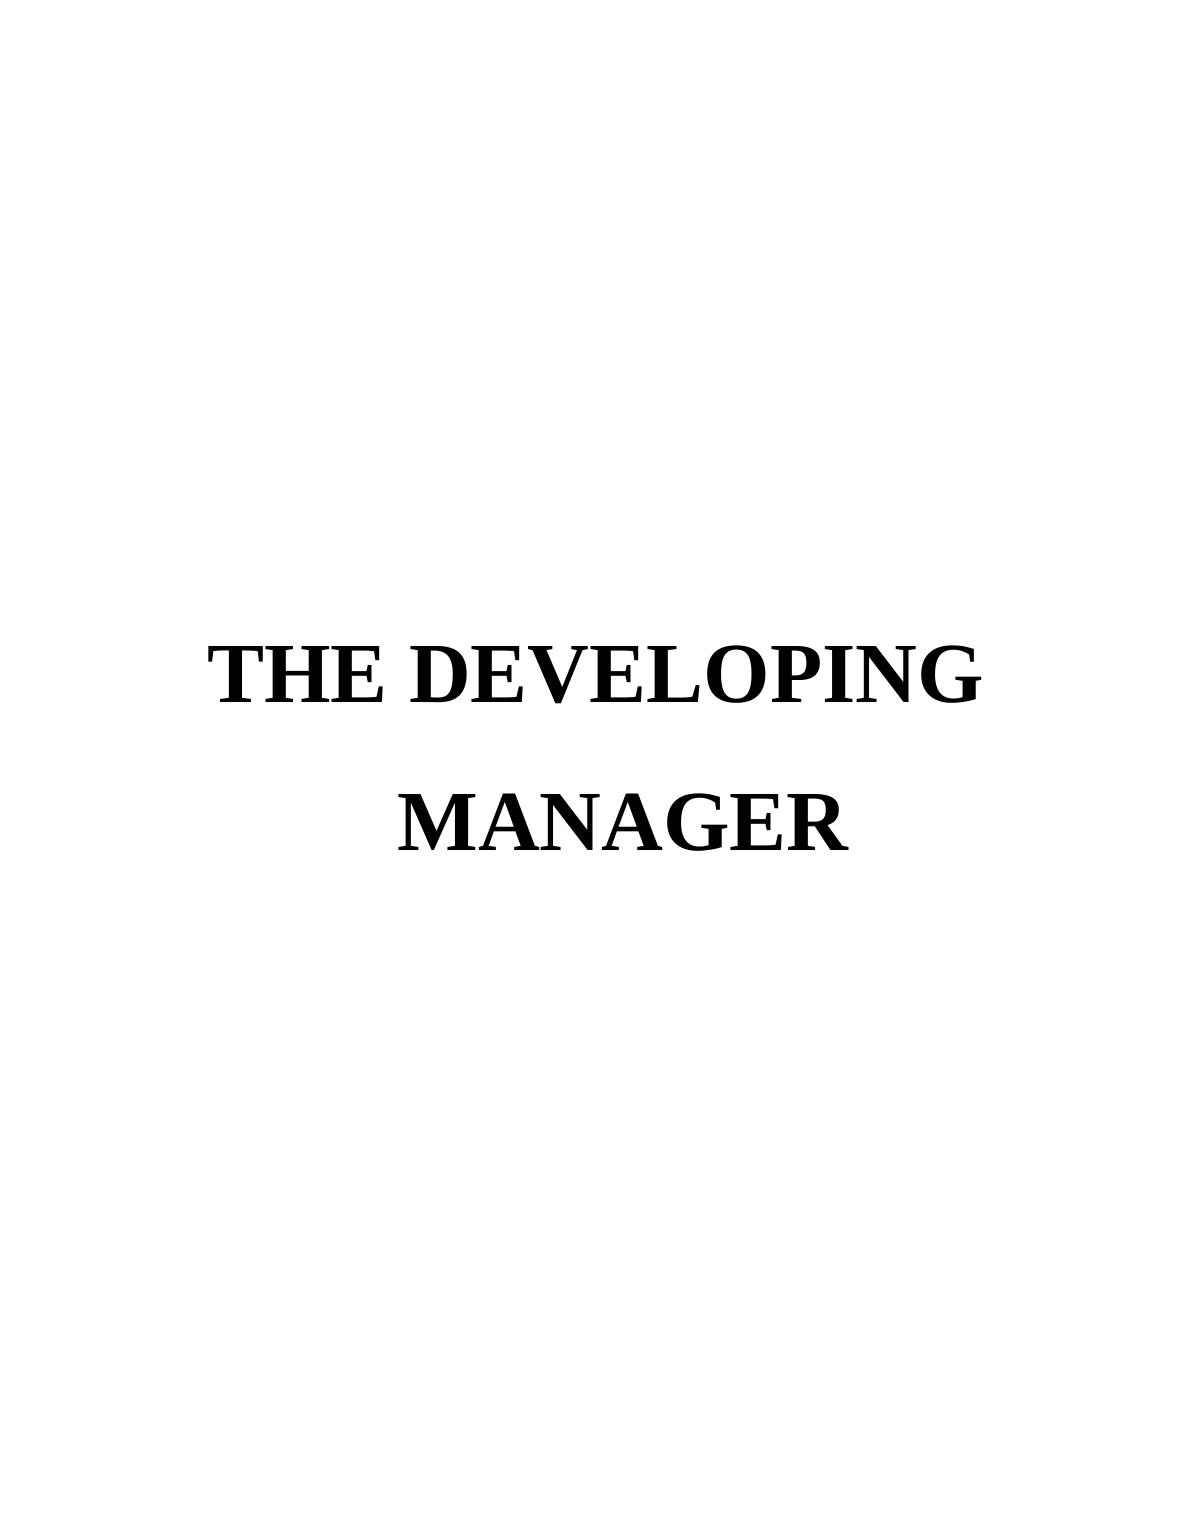 The Developing Manager Assignment : Savoy hotel_1